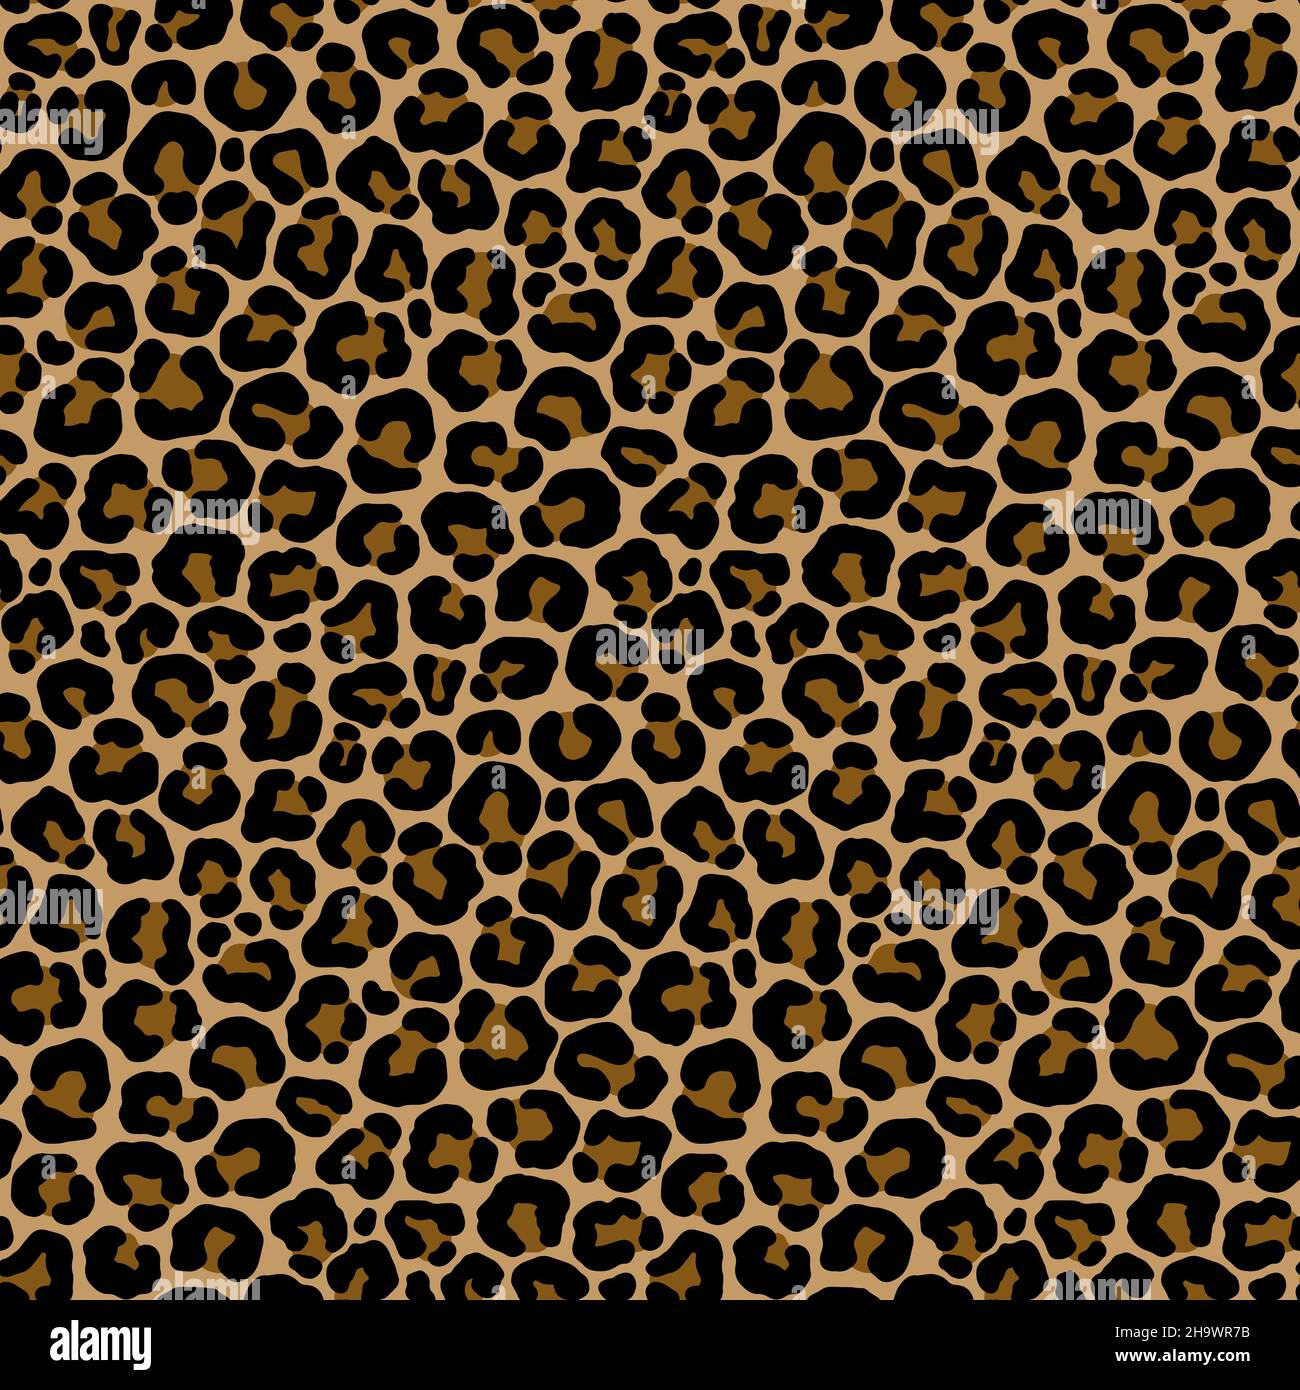 Awesome Leopard Animal Motif Vector Seamless Pattern Design Stock Vector